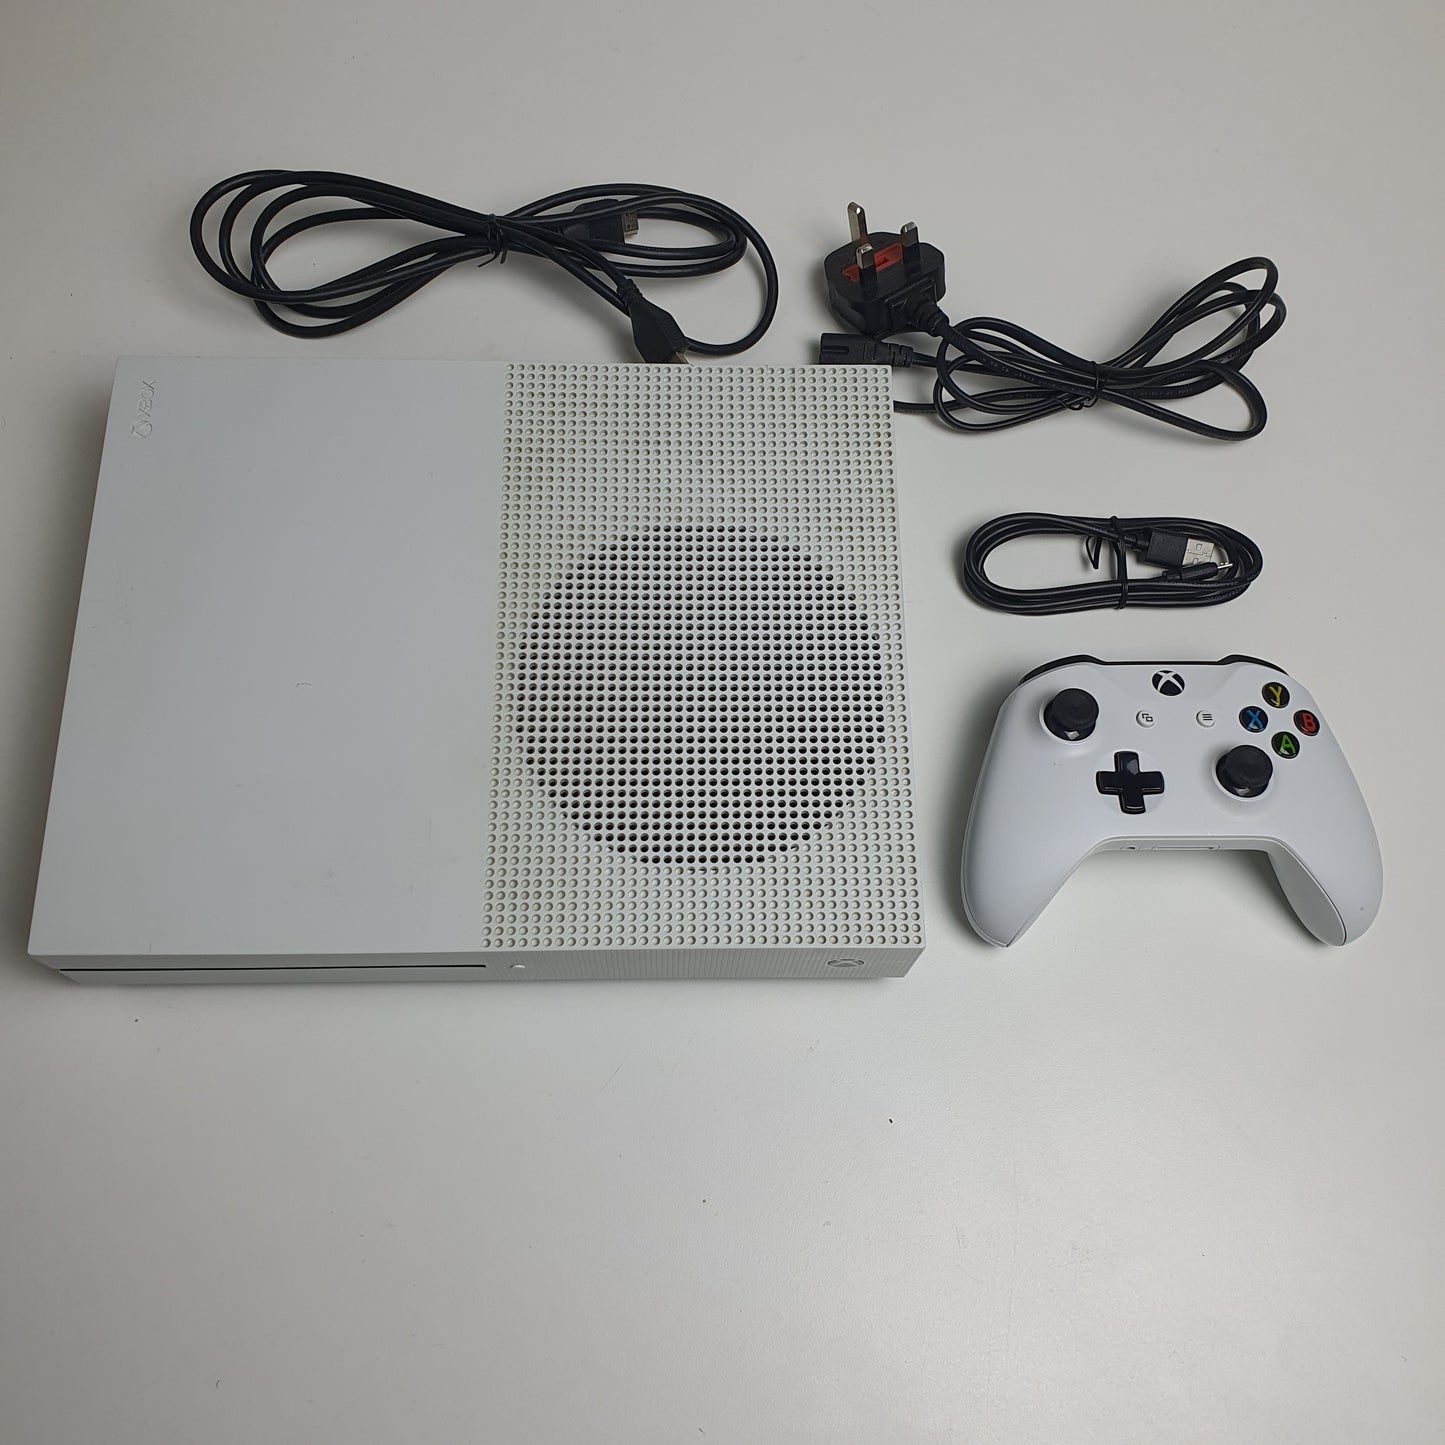 Microsoft Xbox One S 500GB White Disk Edition Bundle - Inc. Console, Controller and Cables